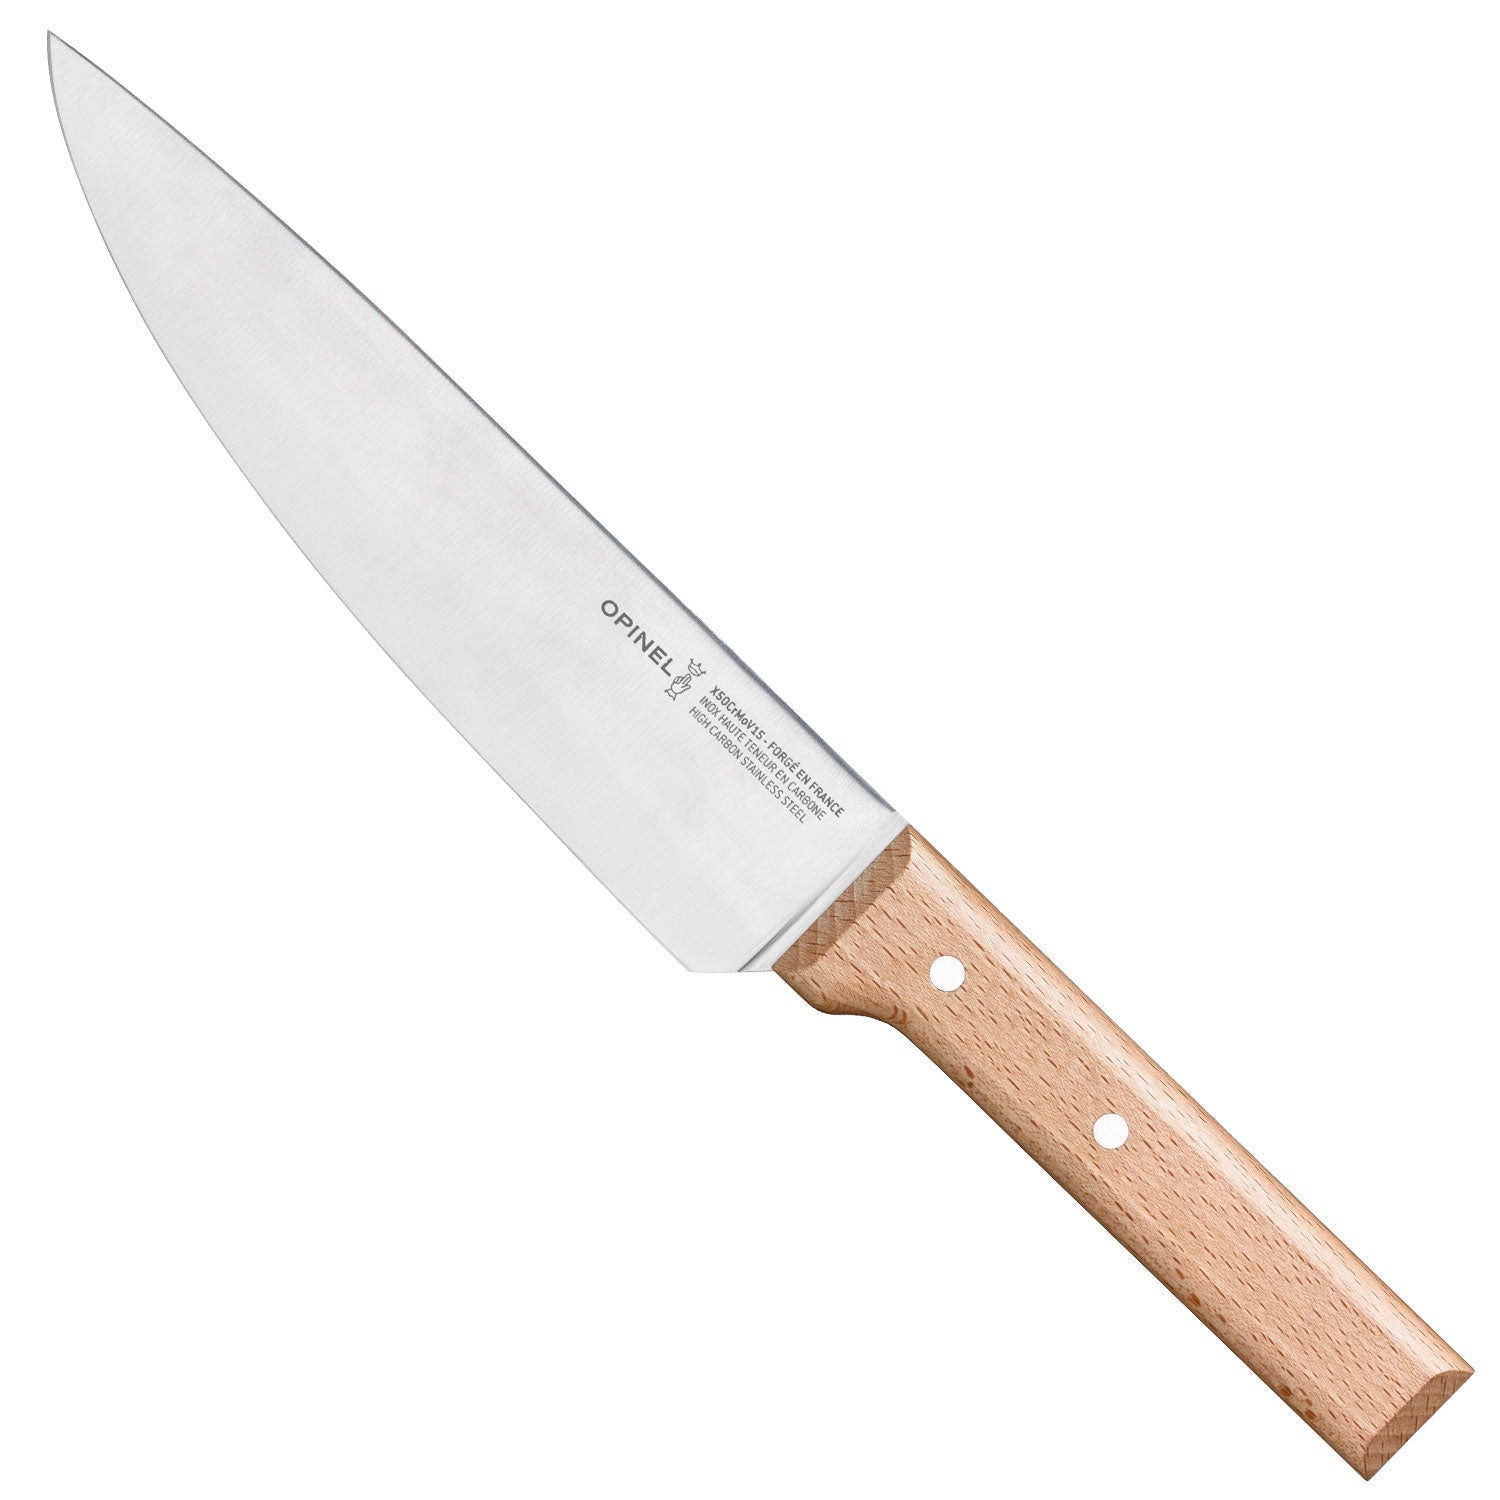 The Best Knives for Arthritic Hands